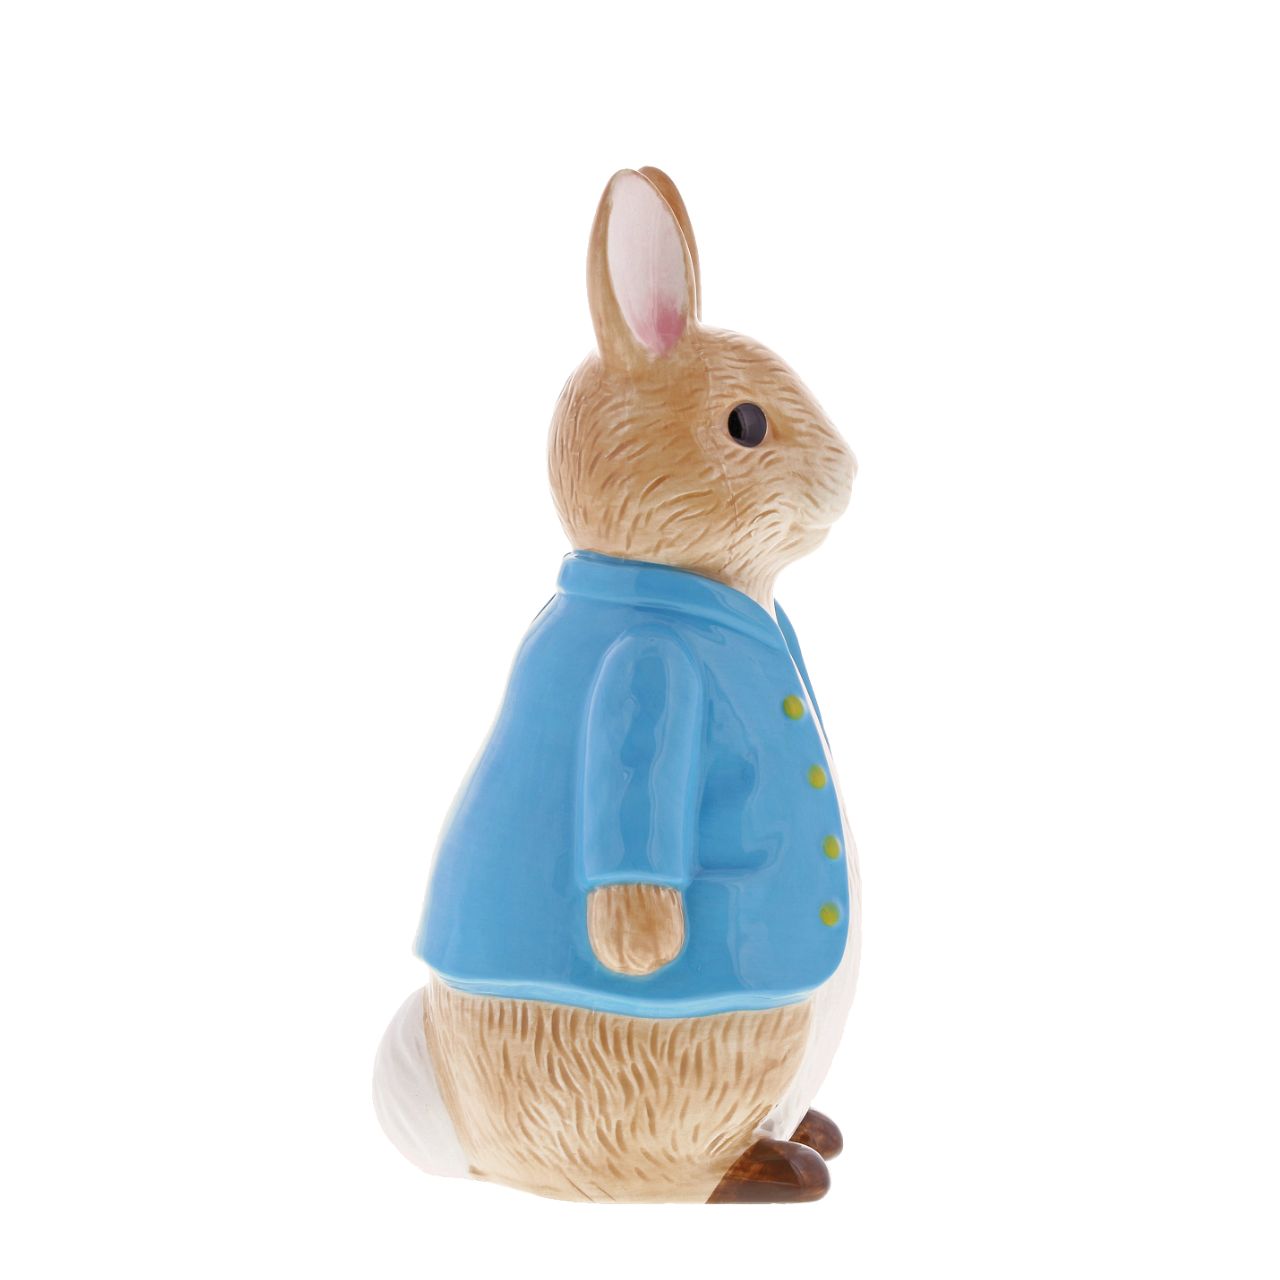 Beatrix Potter Peter Rabbit Sculpted Money Bank  This delightful and charming Peter Rabbit shaped money box would make an ideal christening gift, for collectors and Peter Rabbit fans, both young and old. The artwork is taken from the original illustrations from the Beatrix Potter stories. 